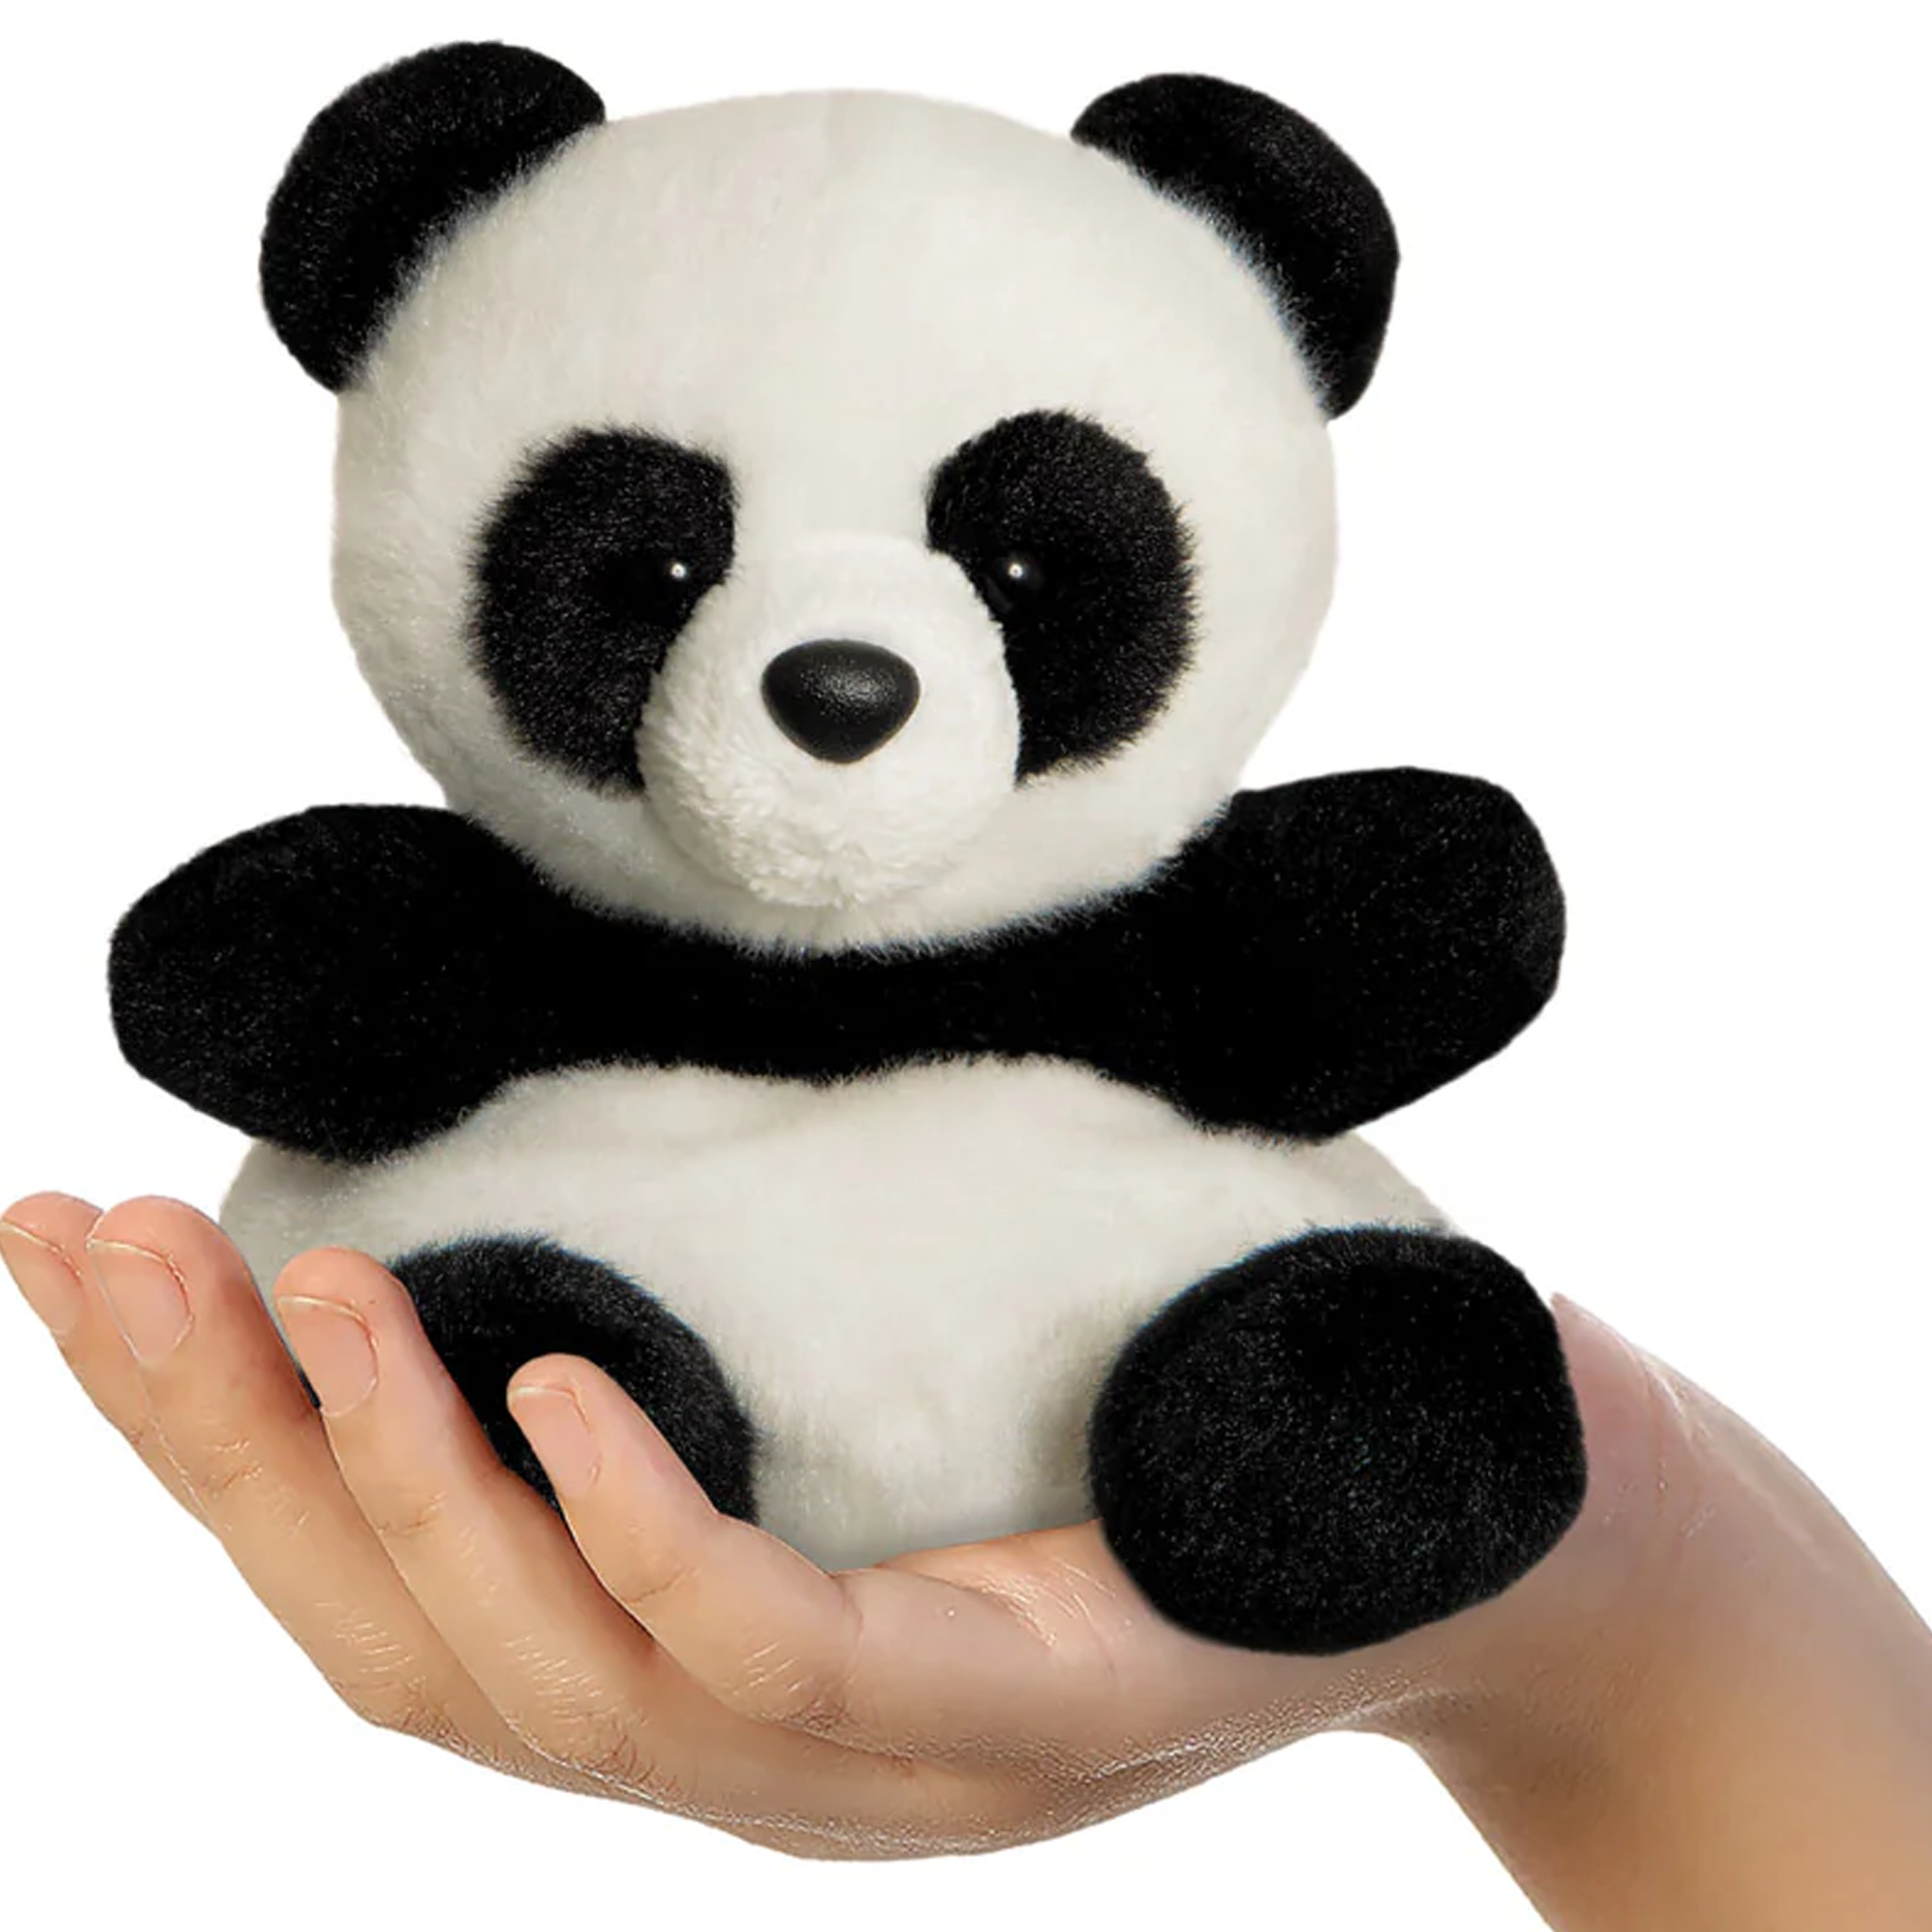 Bamboo Panda Palm Pal Soft Toy in a Hand | Happy Piranha